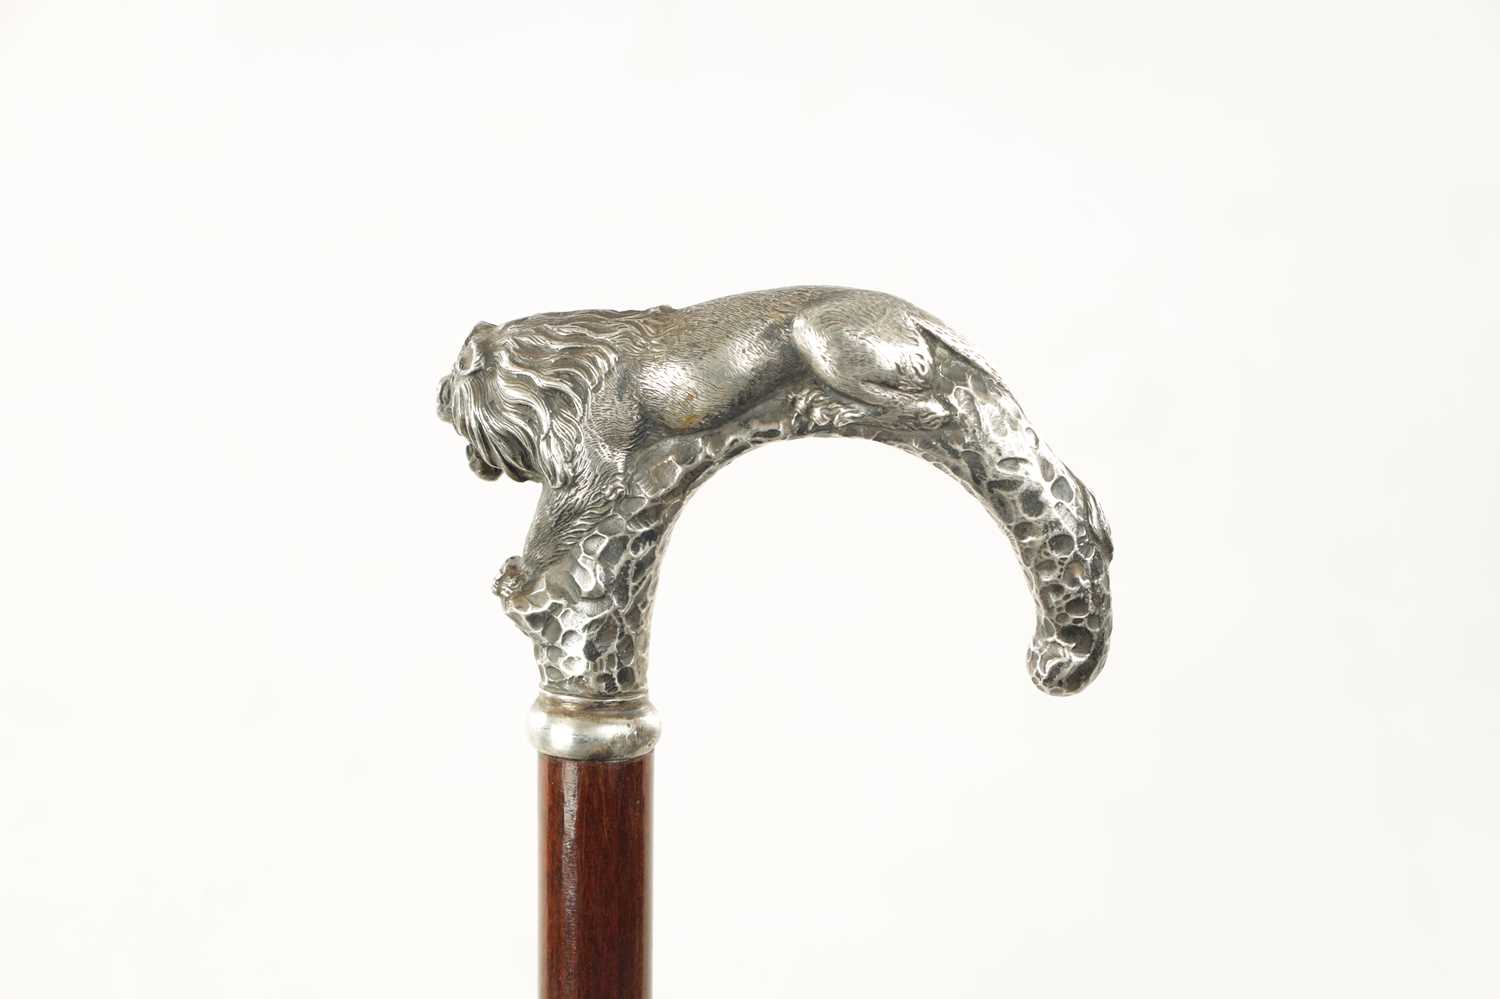 A LATE 19TH CENTURY SILVER TOPPED WALKING STICK MODELLED AS A PROWLING LION - Image 3 of 7